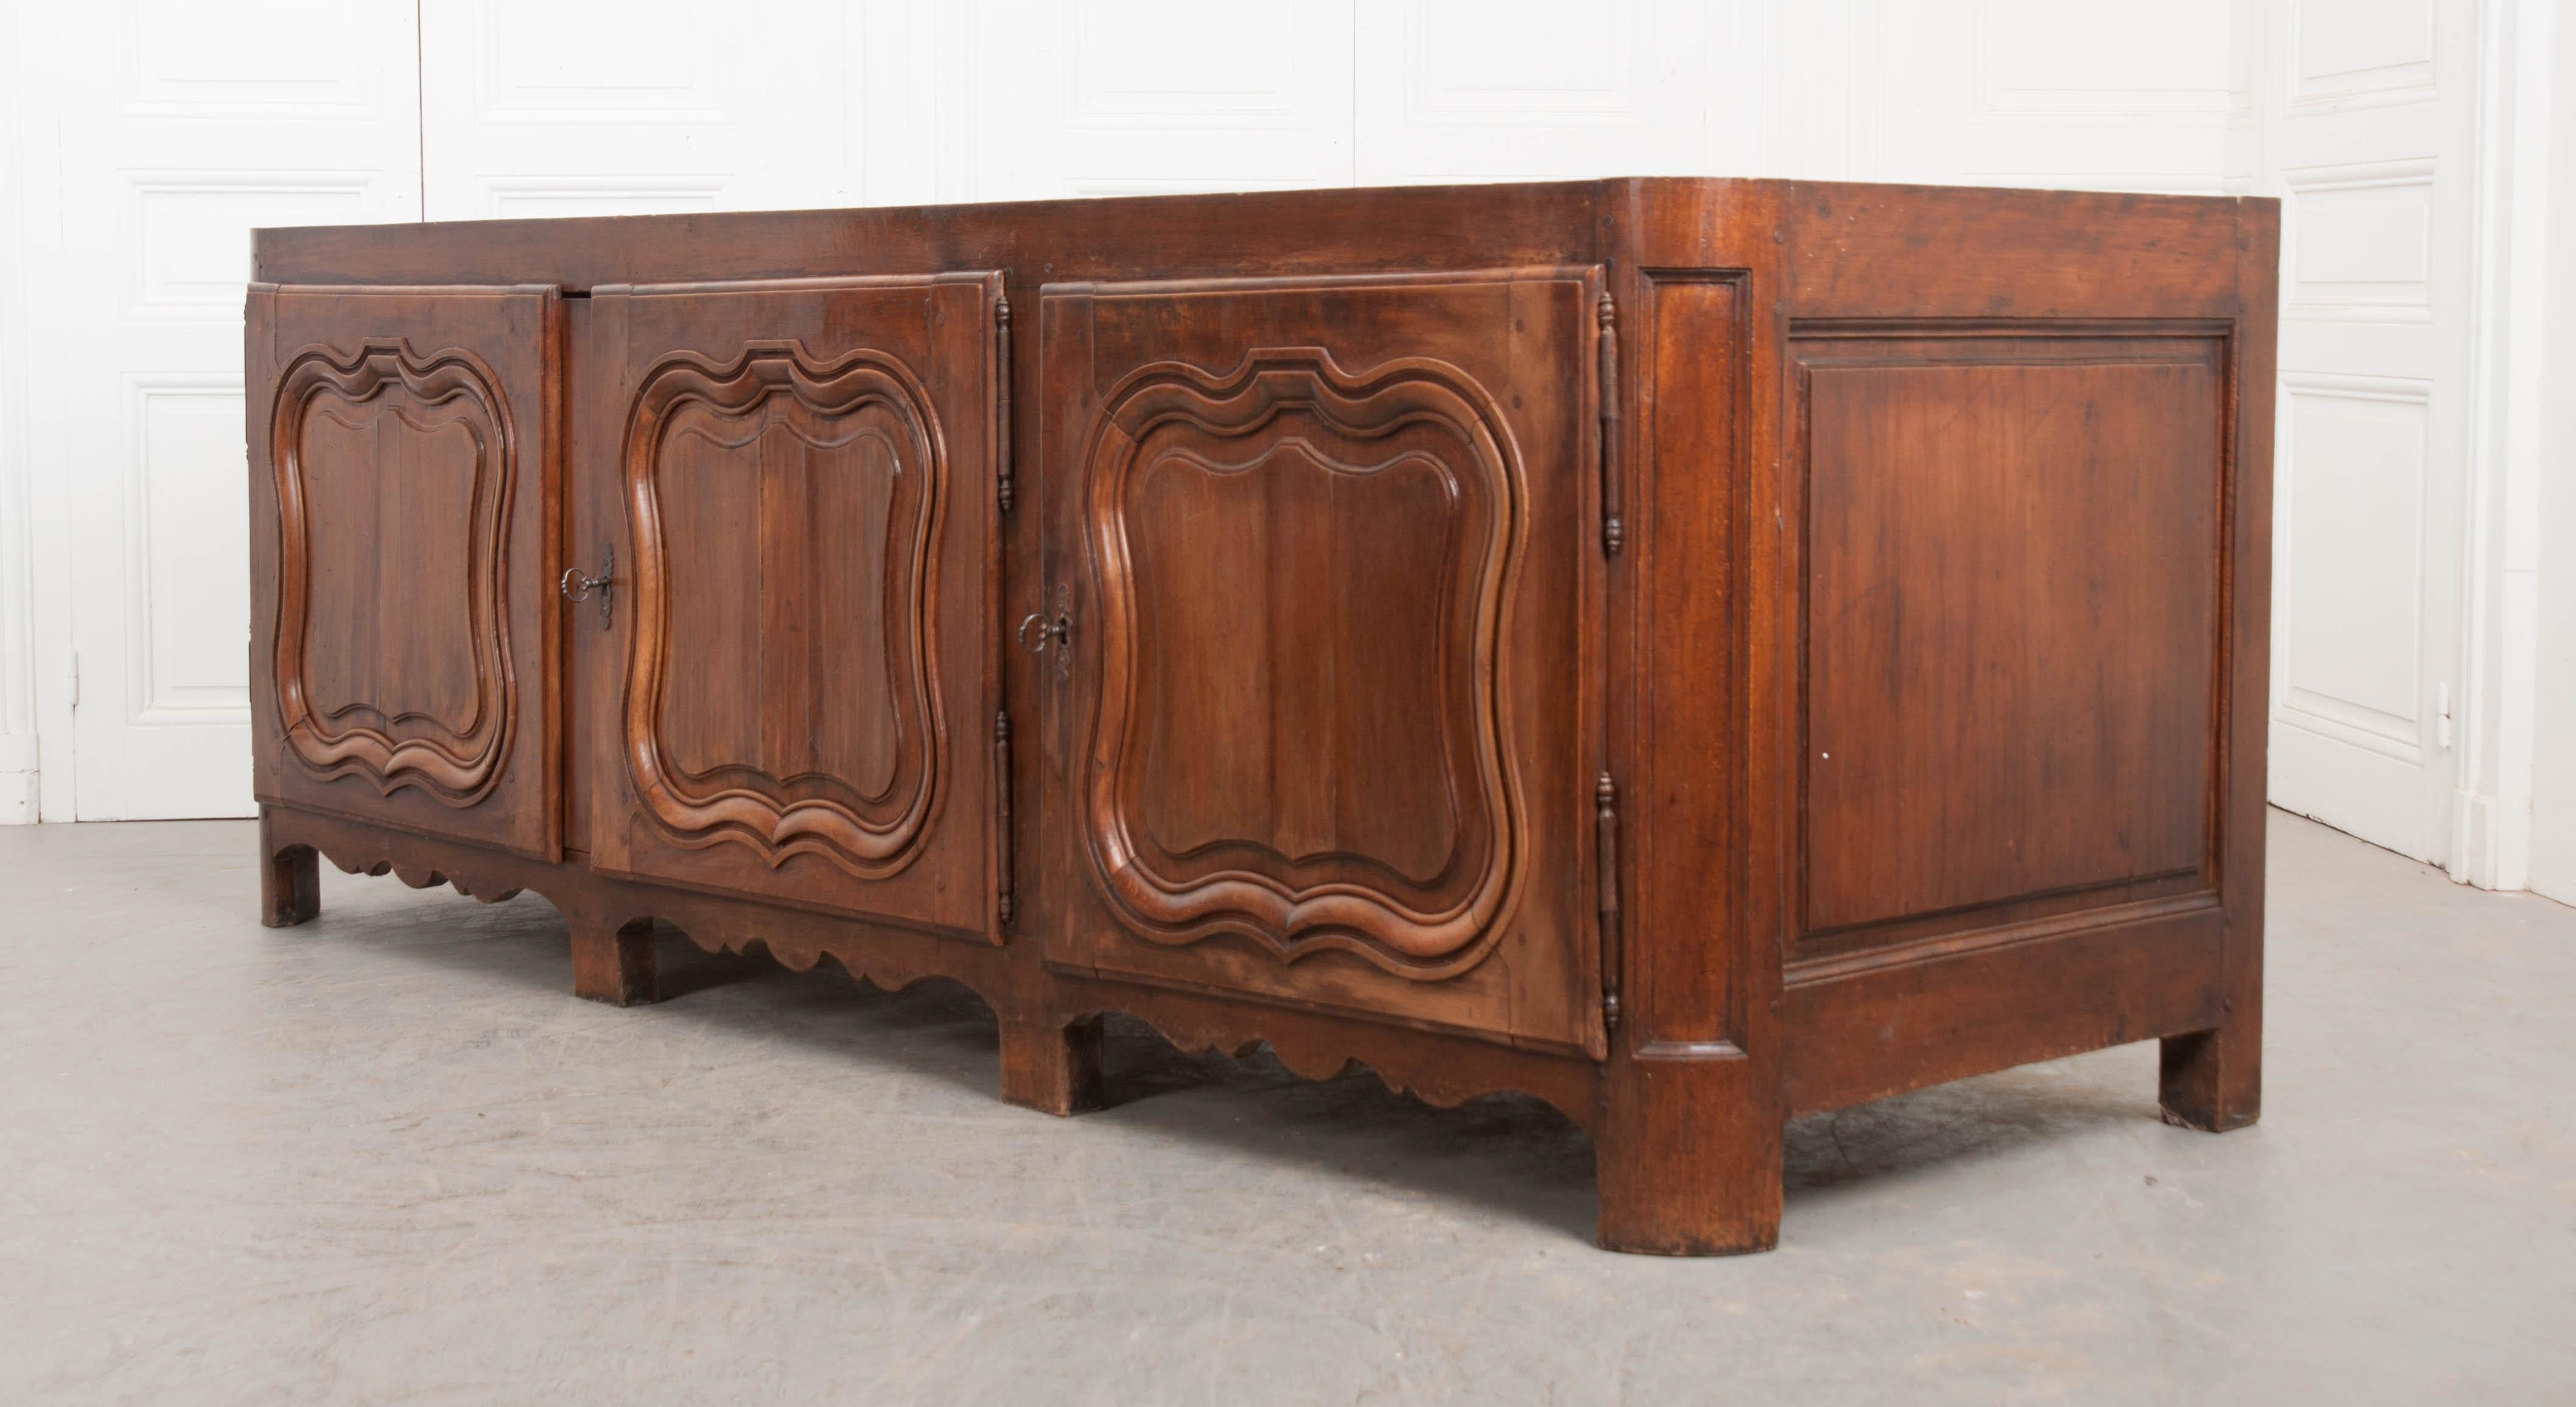 This remarkable French Provincial Louis XV style walnut and marble-top enfilade, circa 1840, is quite deep, offering plenty of storage. The impressive grey-brown marble top, with white inclusions, has recently been repaired and shows some scratches.